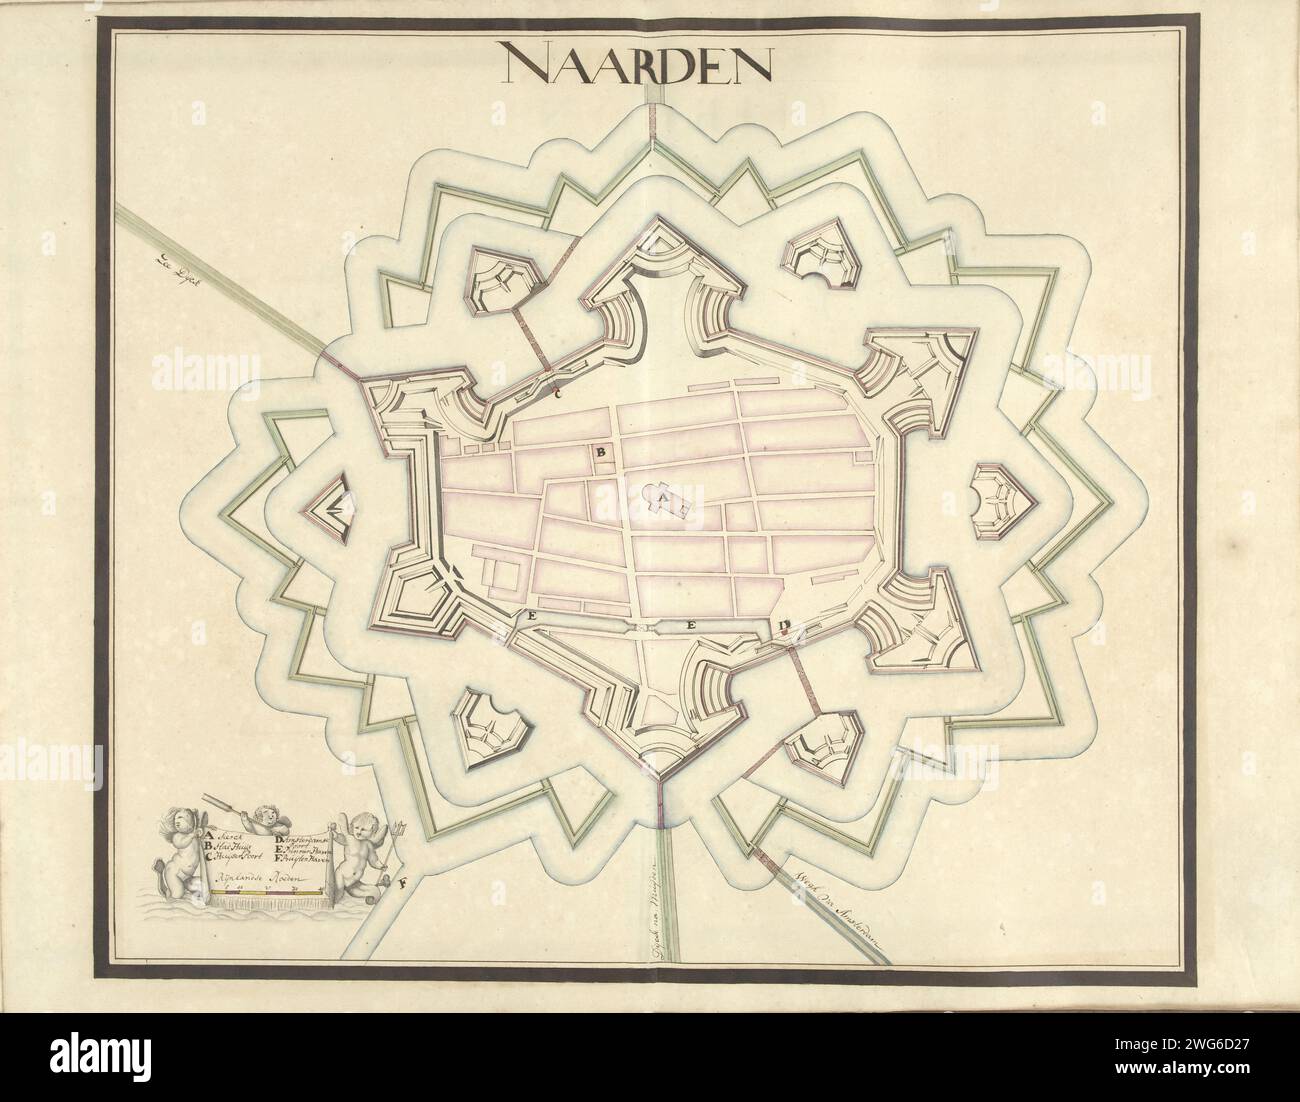 Map of Naarden, ca. 1701-1715, 1701 - 1715 drawing Map of the reinforcements around the city of Naarden, ca. 1701-1715. Bottom left a cartouche with the legend A-f in Dutch, with three putti as sea creatures. Part of a collection of signed plans of reinforced places in the Netherlands and surrounding countries at the time of the Spanish Succession War (part A). Netherlands paper  maps of cities. fortress Naarden Stock Photo